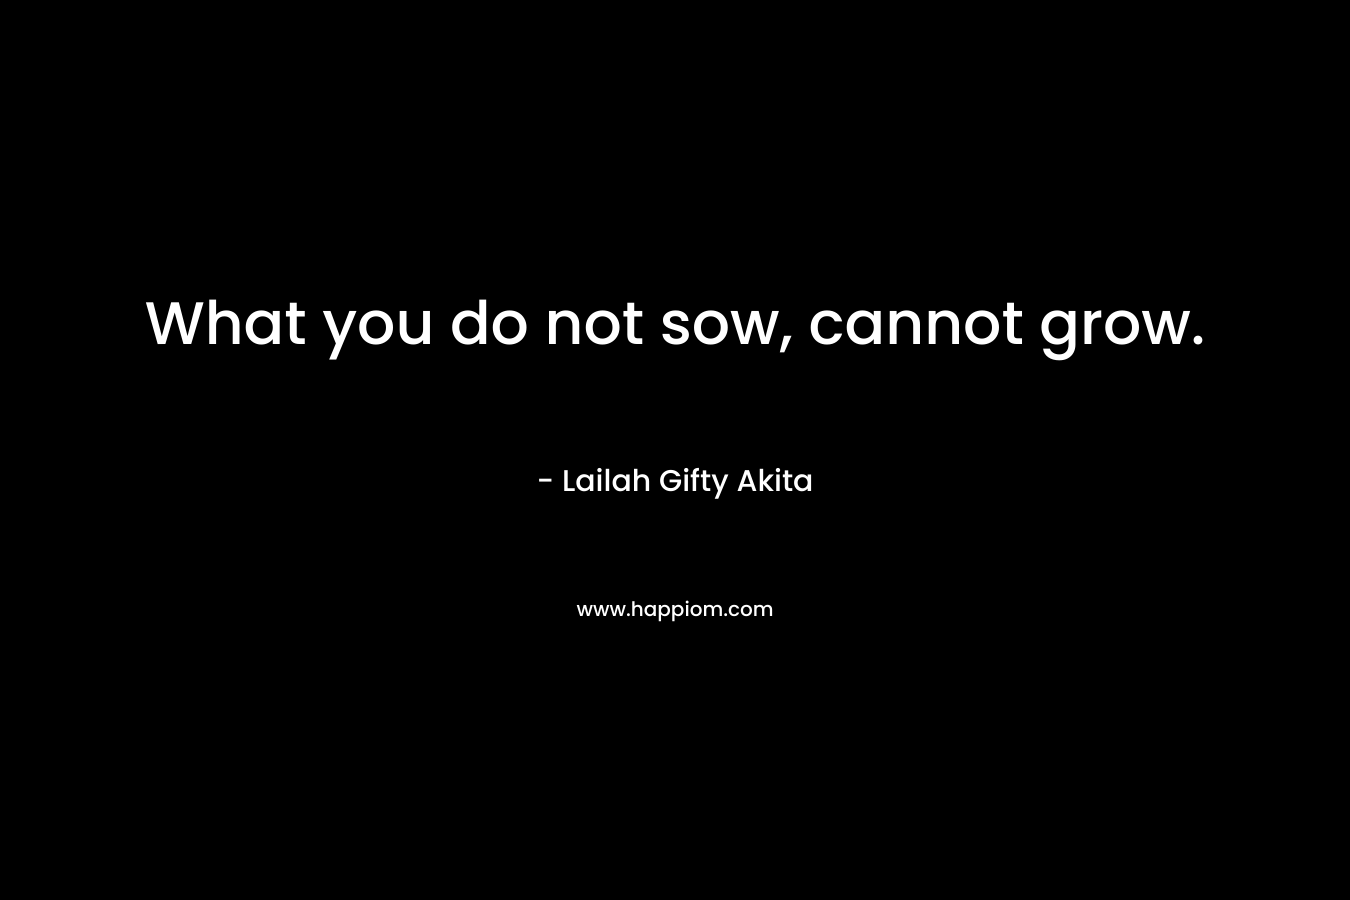 What you do not sow, cannot grow.